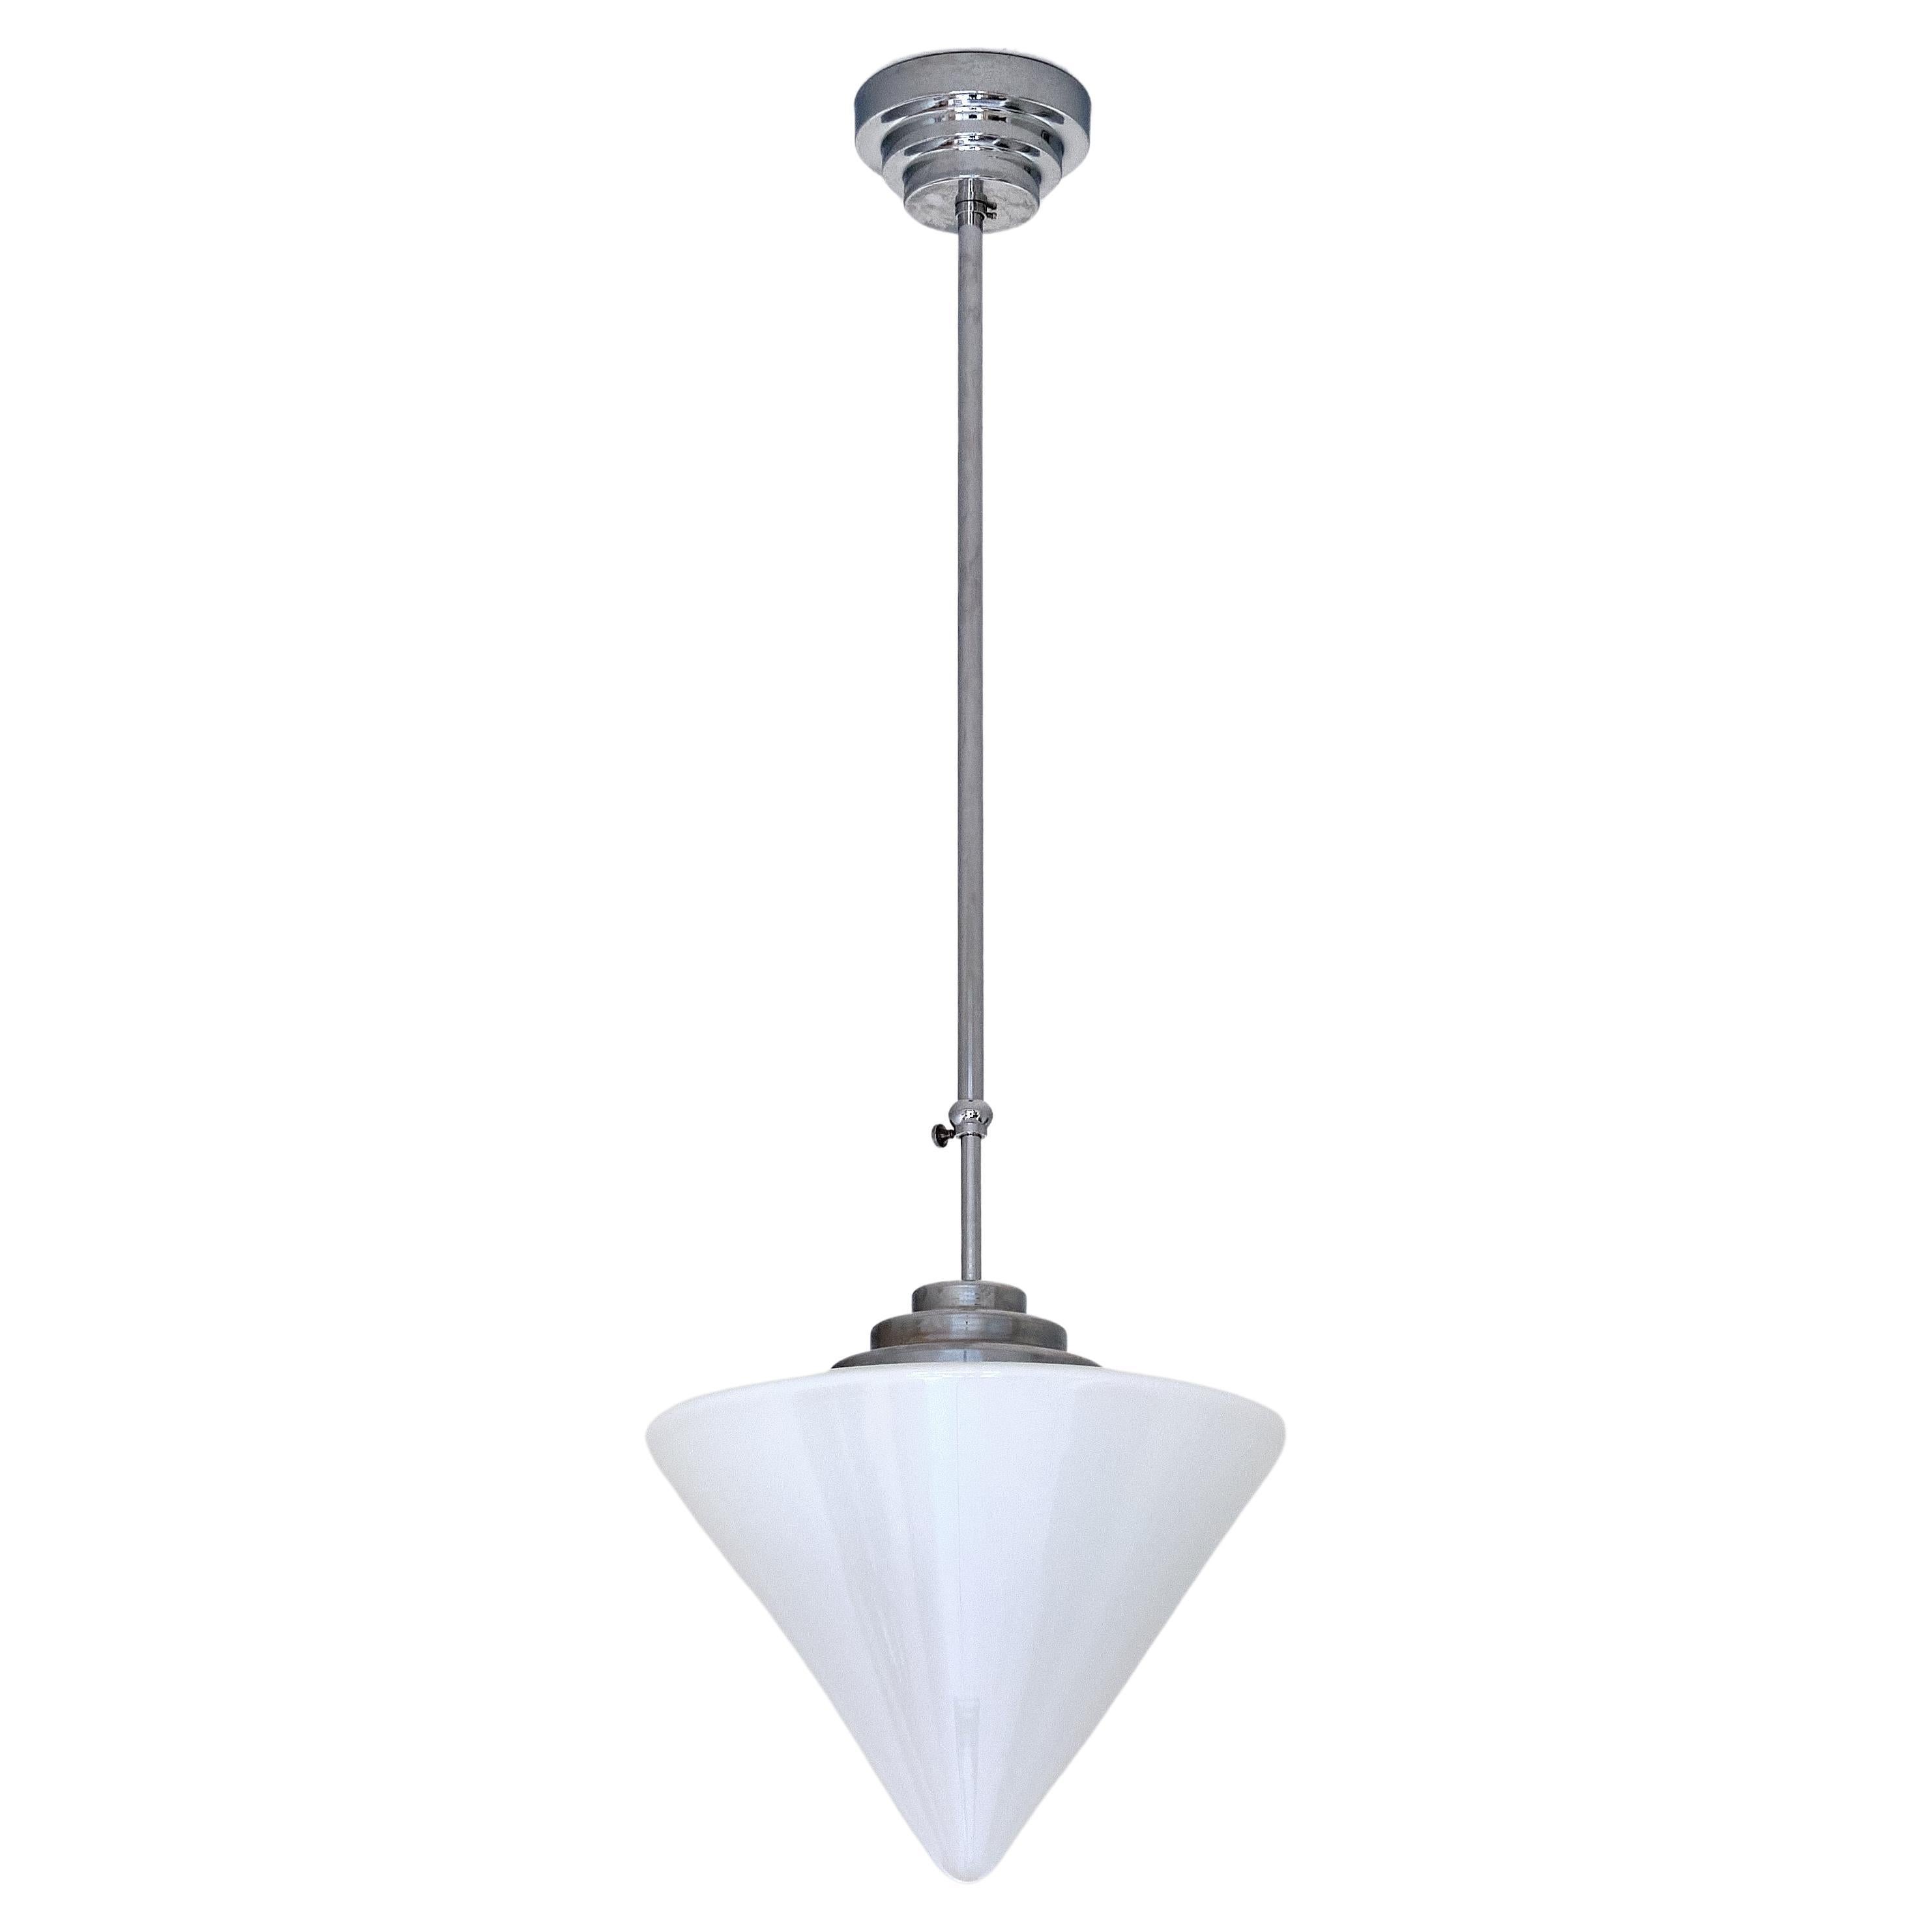 Gispen Cone Shaped Pendant Light with Adjustable Drop Height, Netherlands, 1950s For Sale